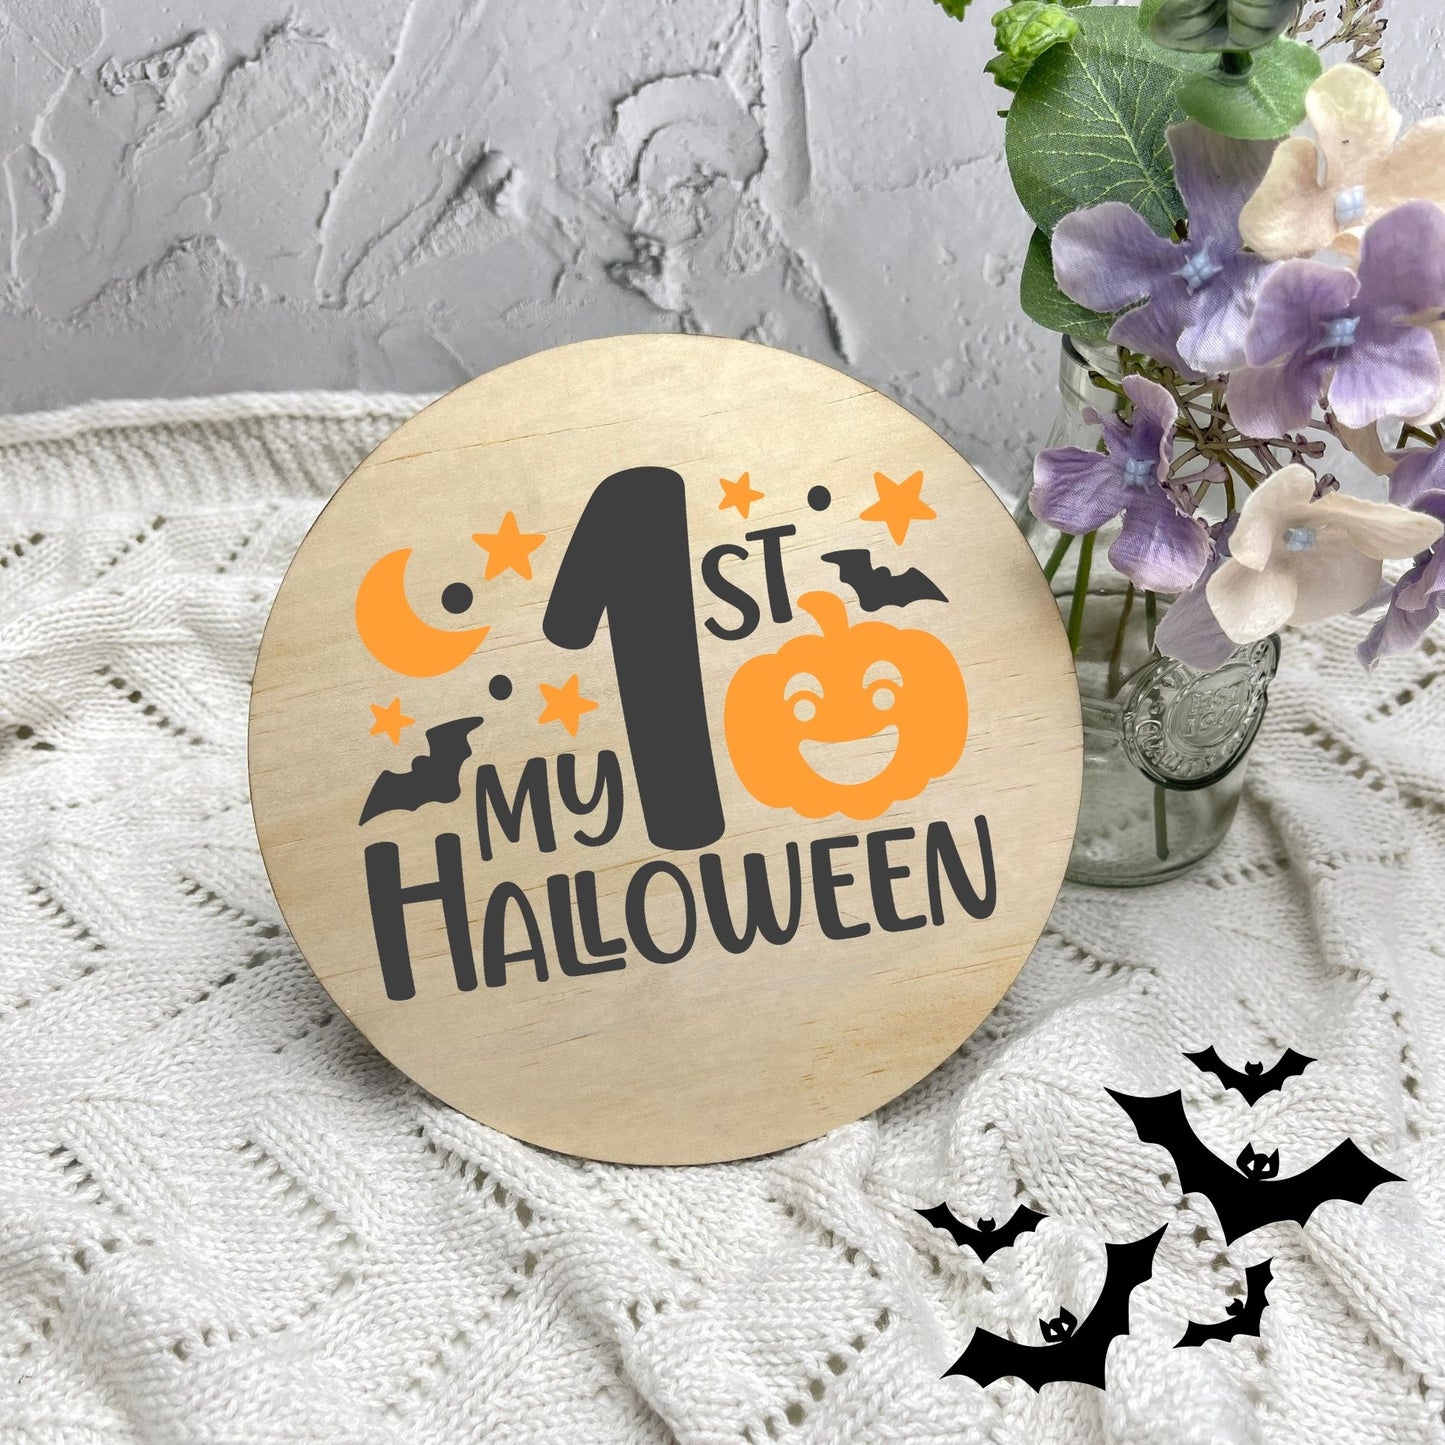 My first Halloween sign, Halloween Decor, Spooky Vibes, hocus pocus sign, trick or treat decor, haunted house h9